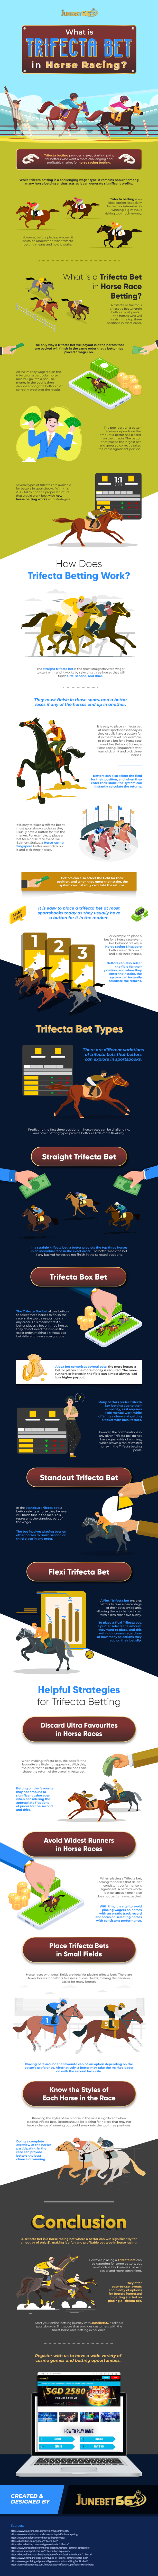 What-is-Trifecta-Bet-in-Horse-Racing?-Infographic-04